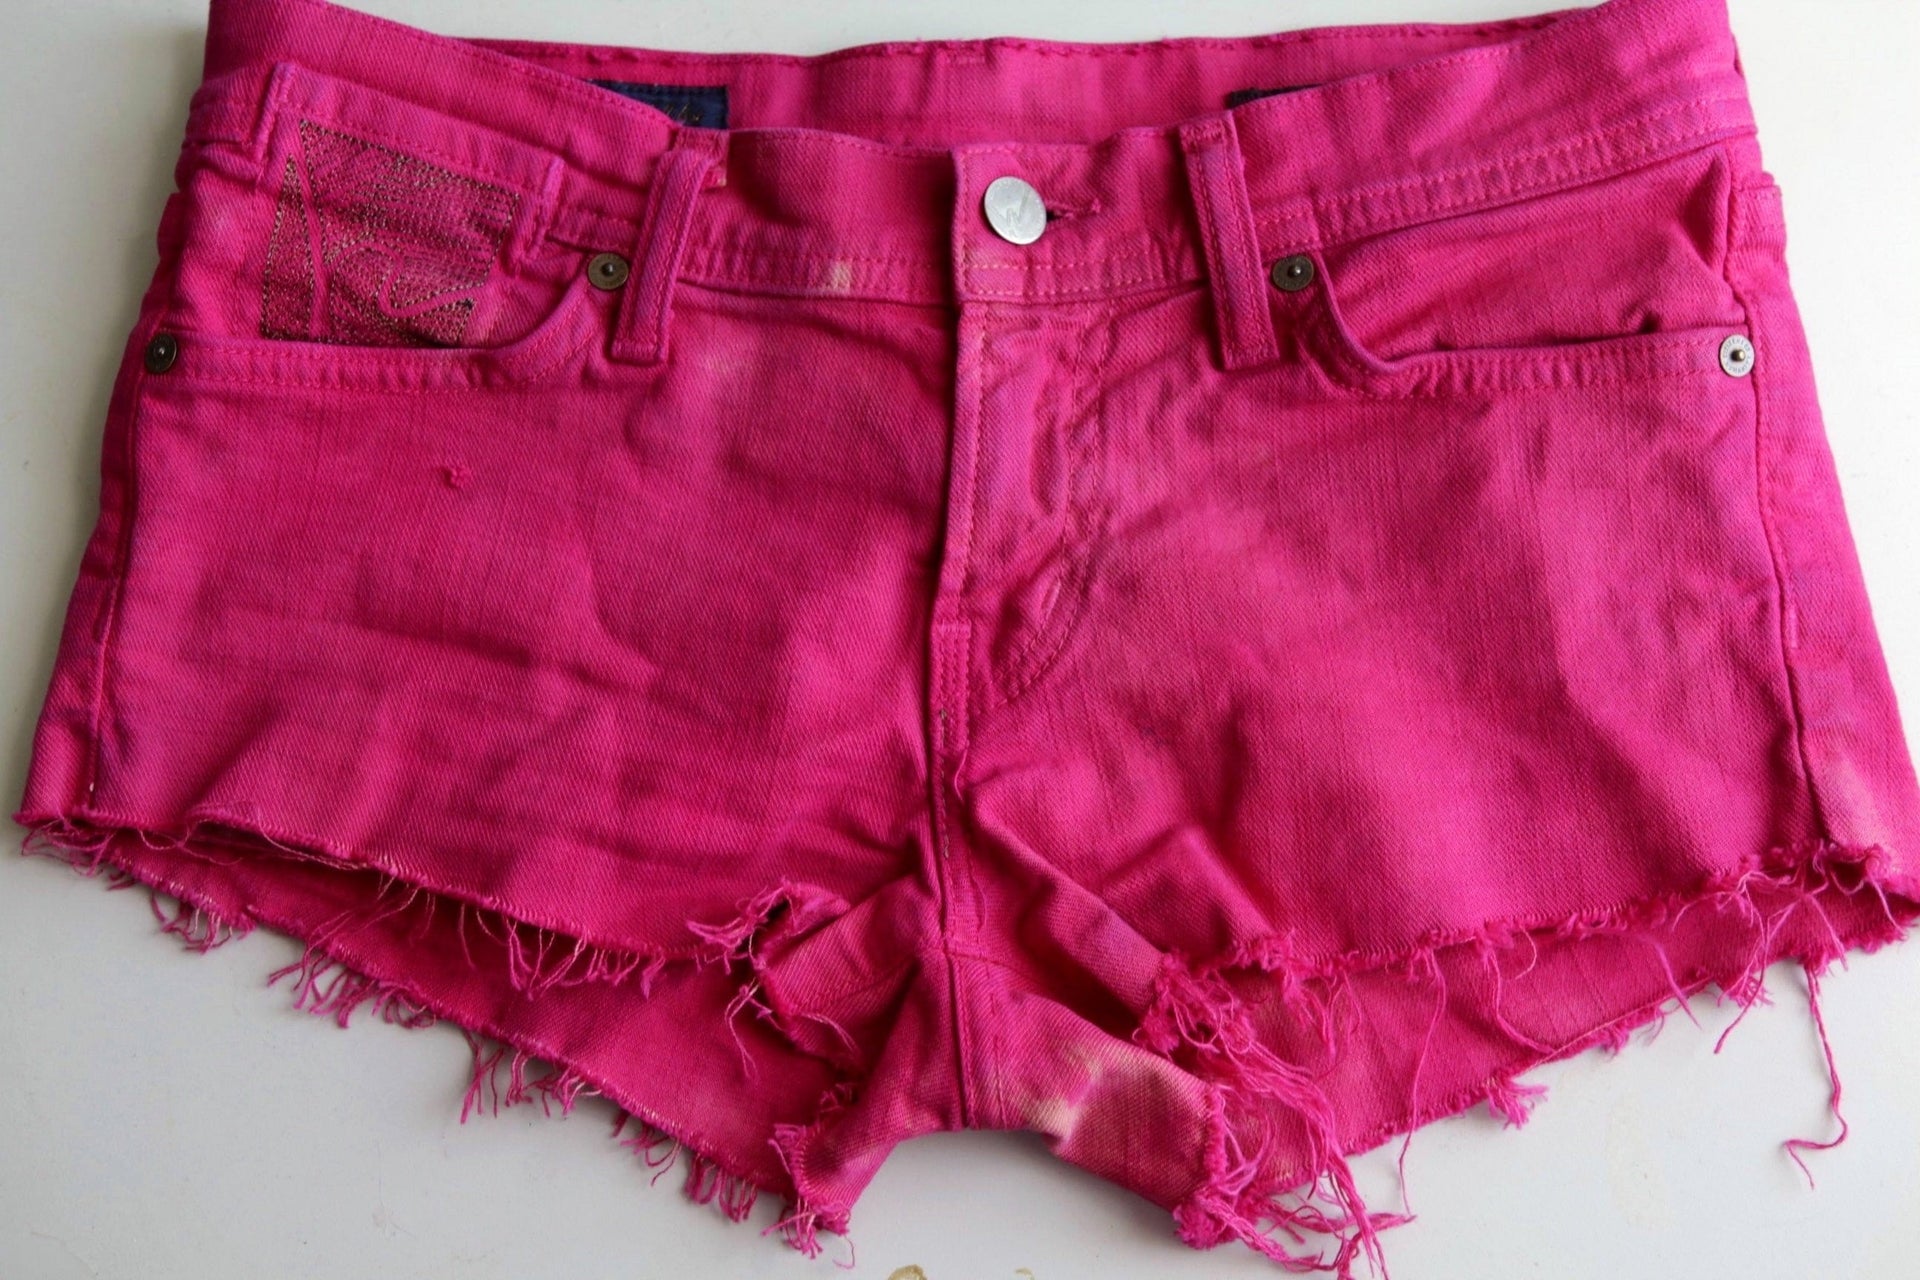 Citizens for humanity upcycled red cut-off denim shorts